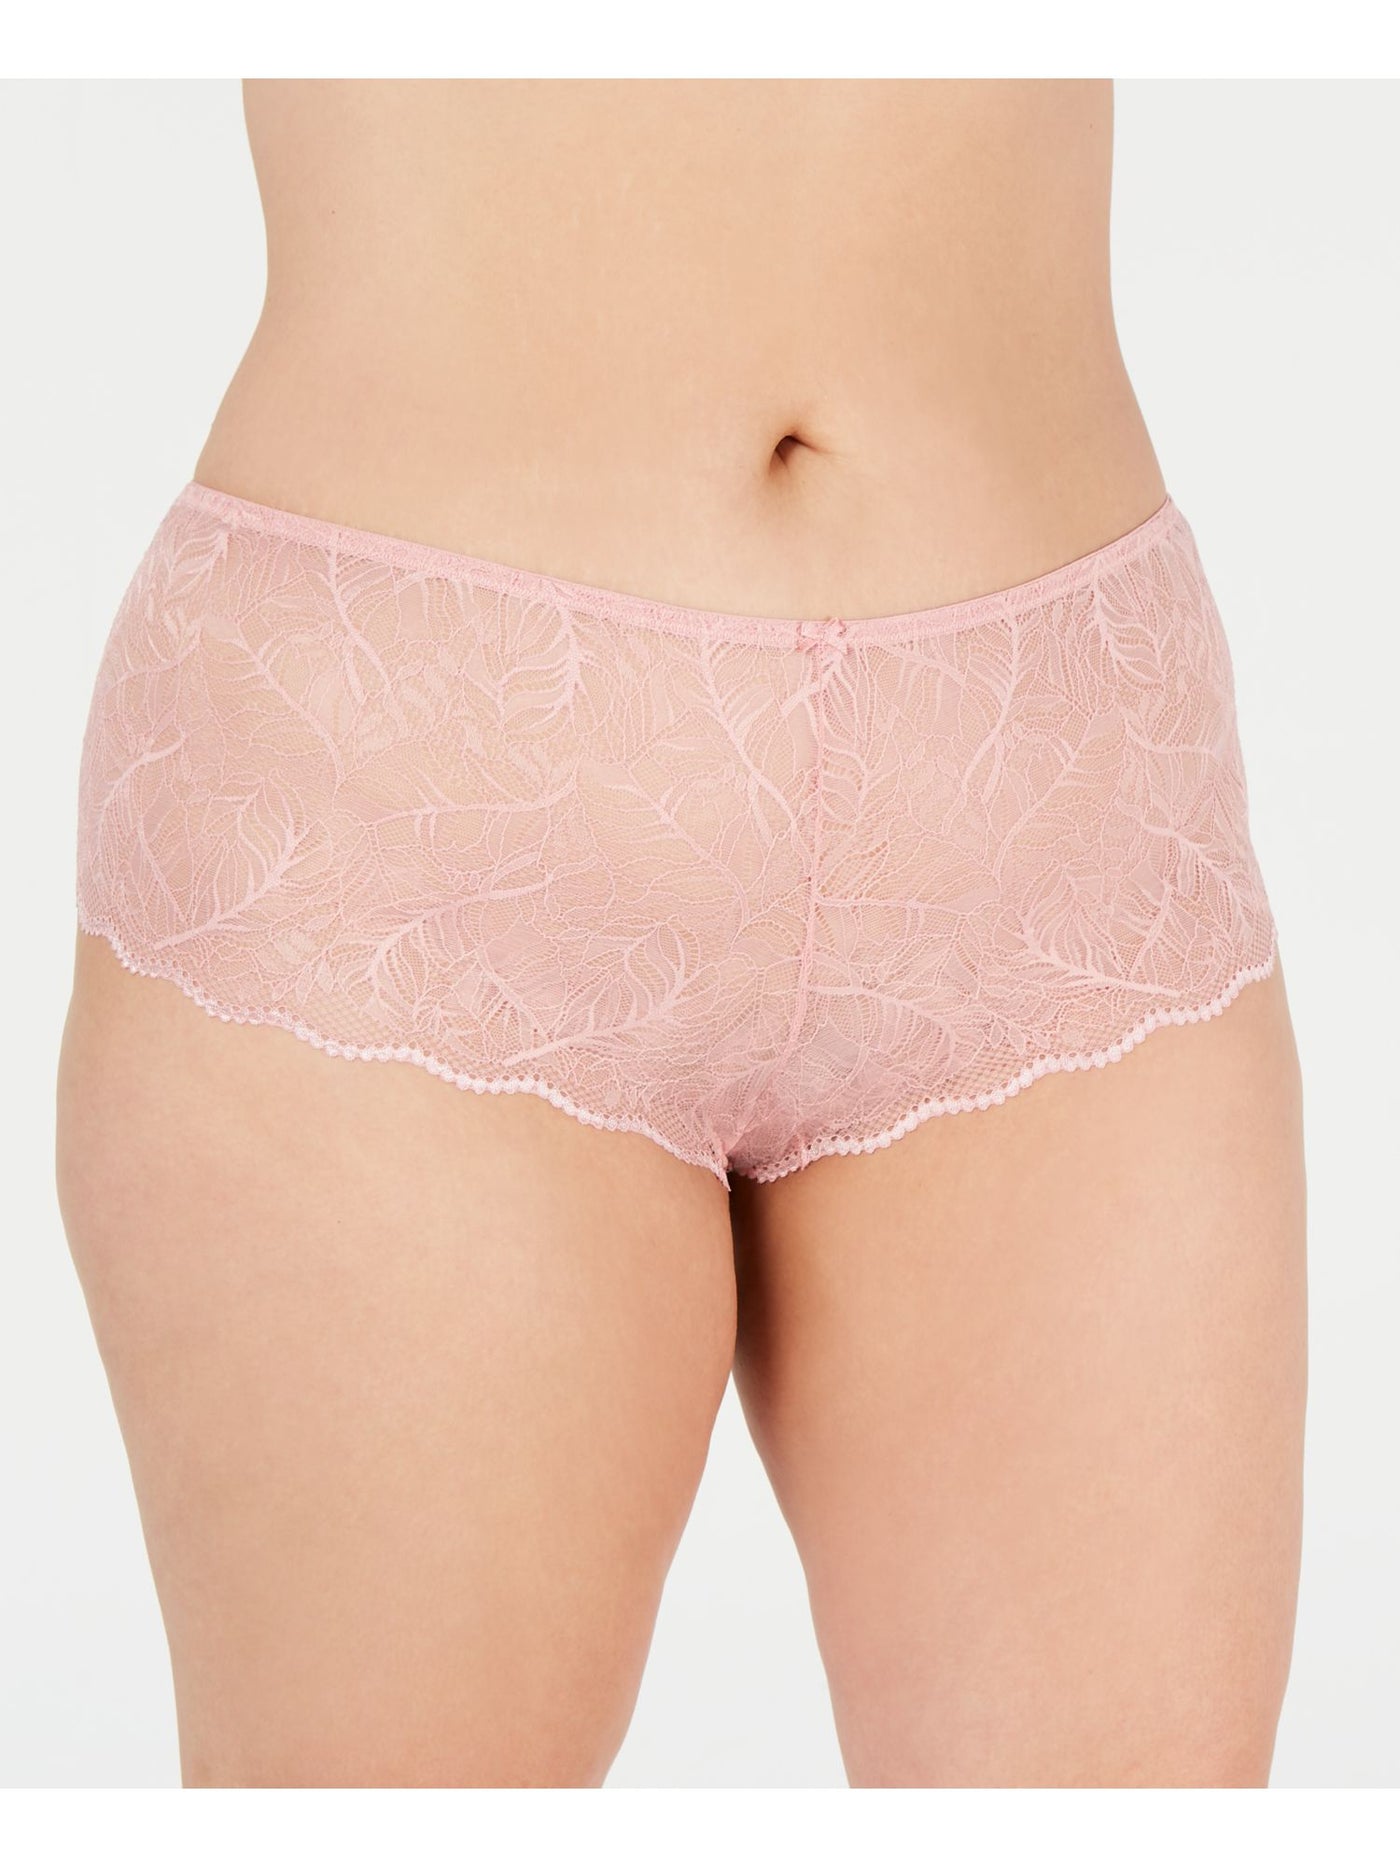 INC Intimates Pink Lace Solid Everyday Boy Short Plus Size: 2X